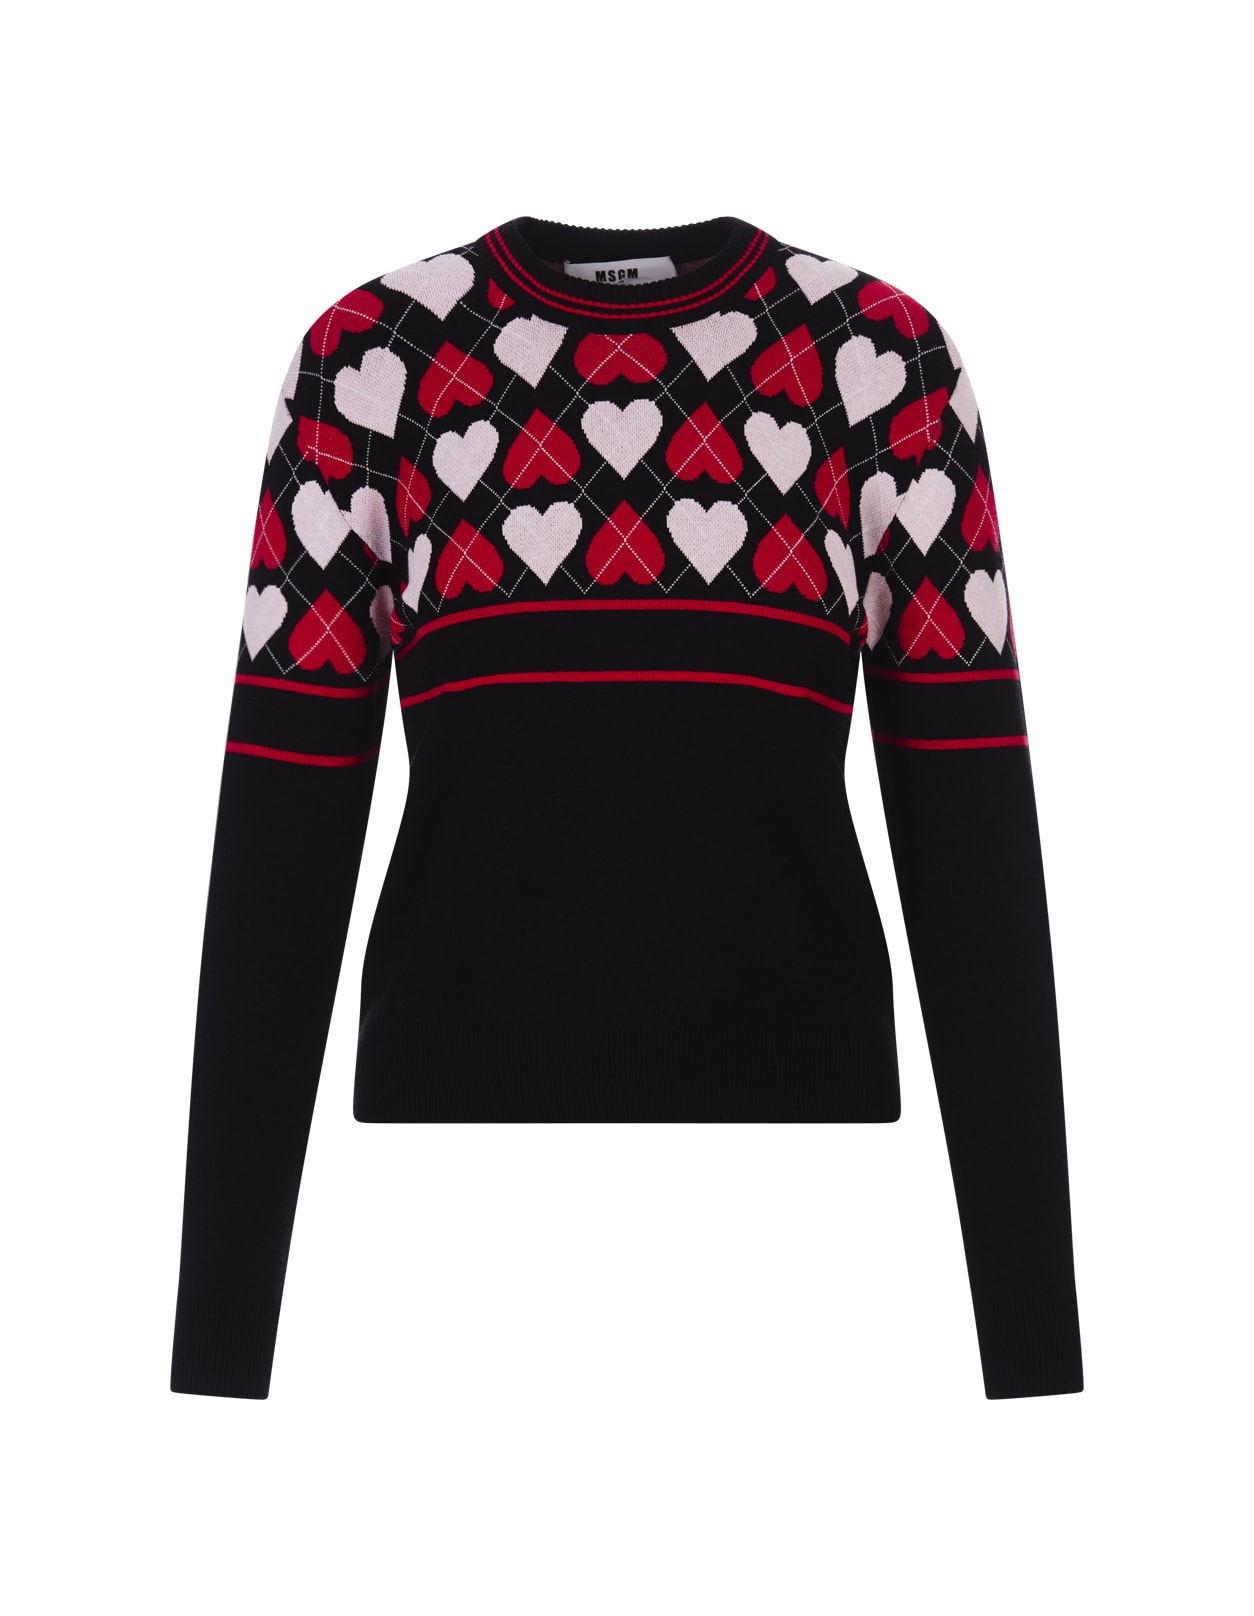 MSGM BLACK SWEATER WITH ACTIVE HEARTS MOTIF